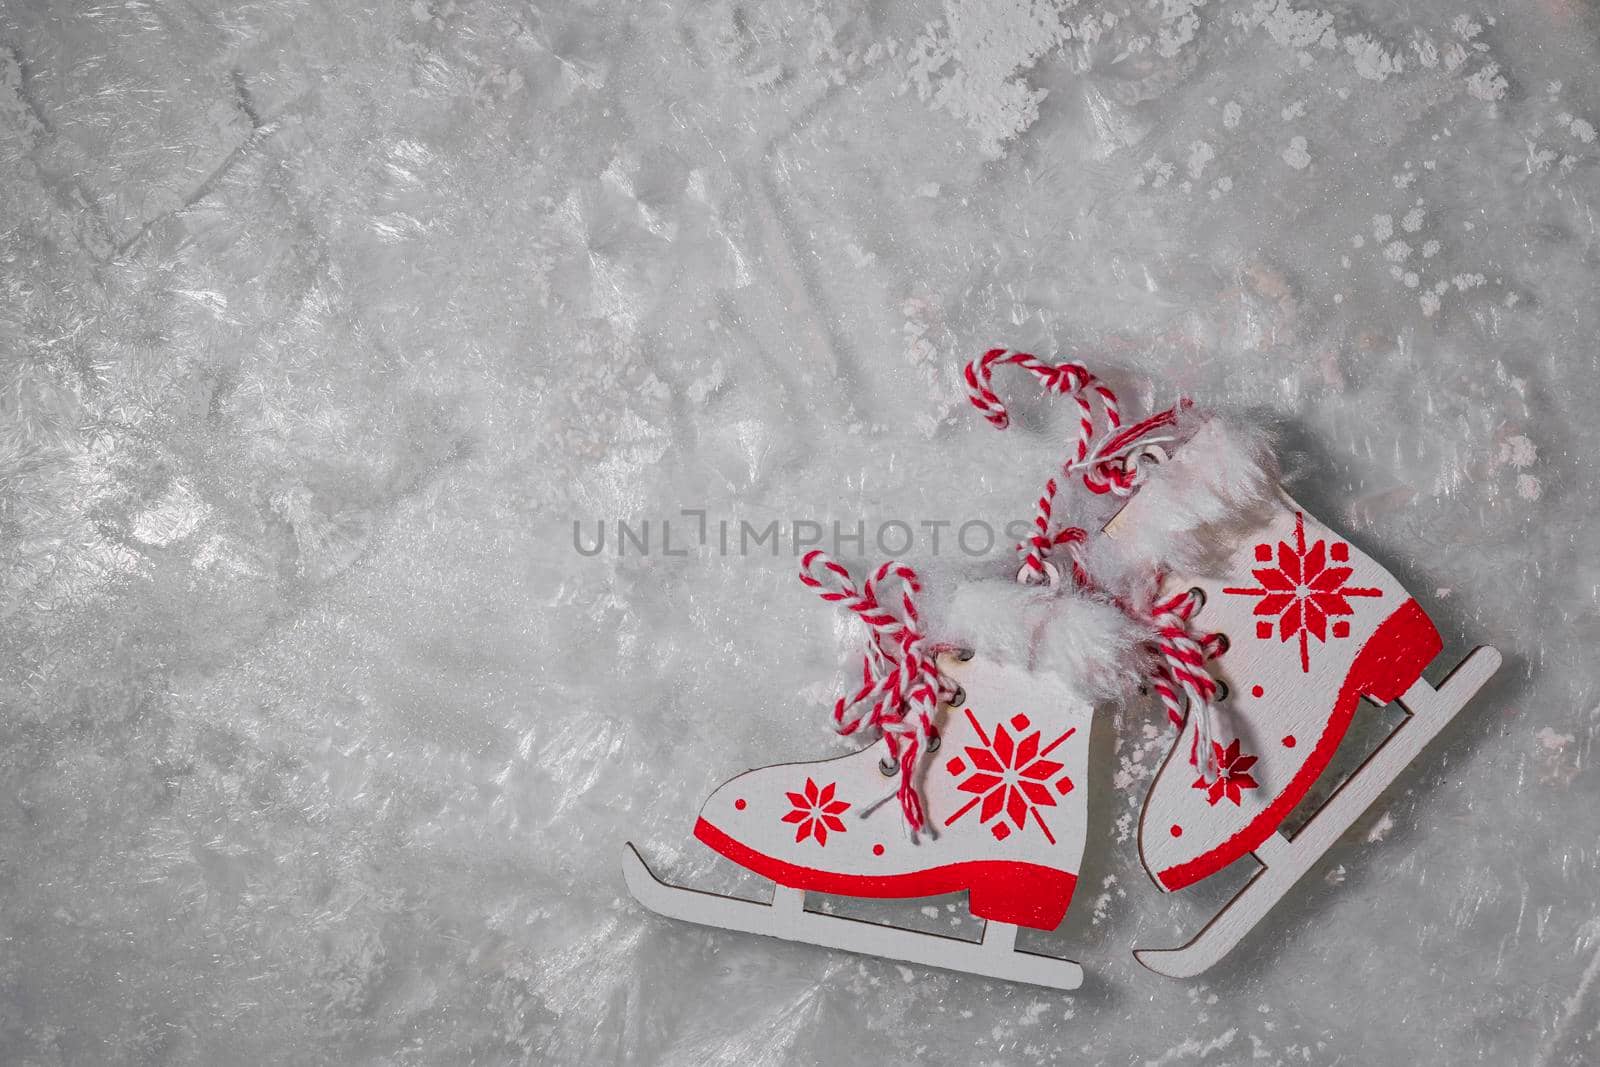 figurines of ice skates with a red pattern on frosty ice, sparkling frost or water crystals. winter sport or entertainment concept. copy space